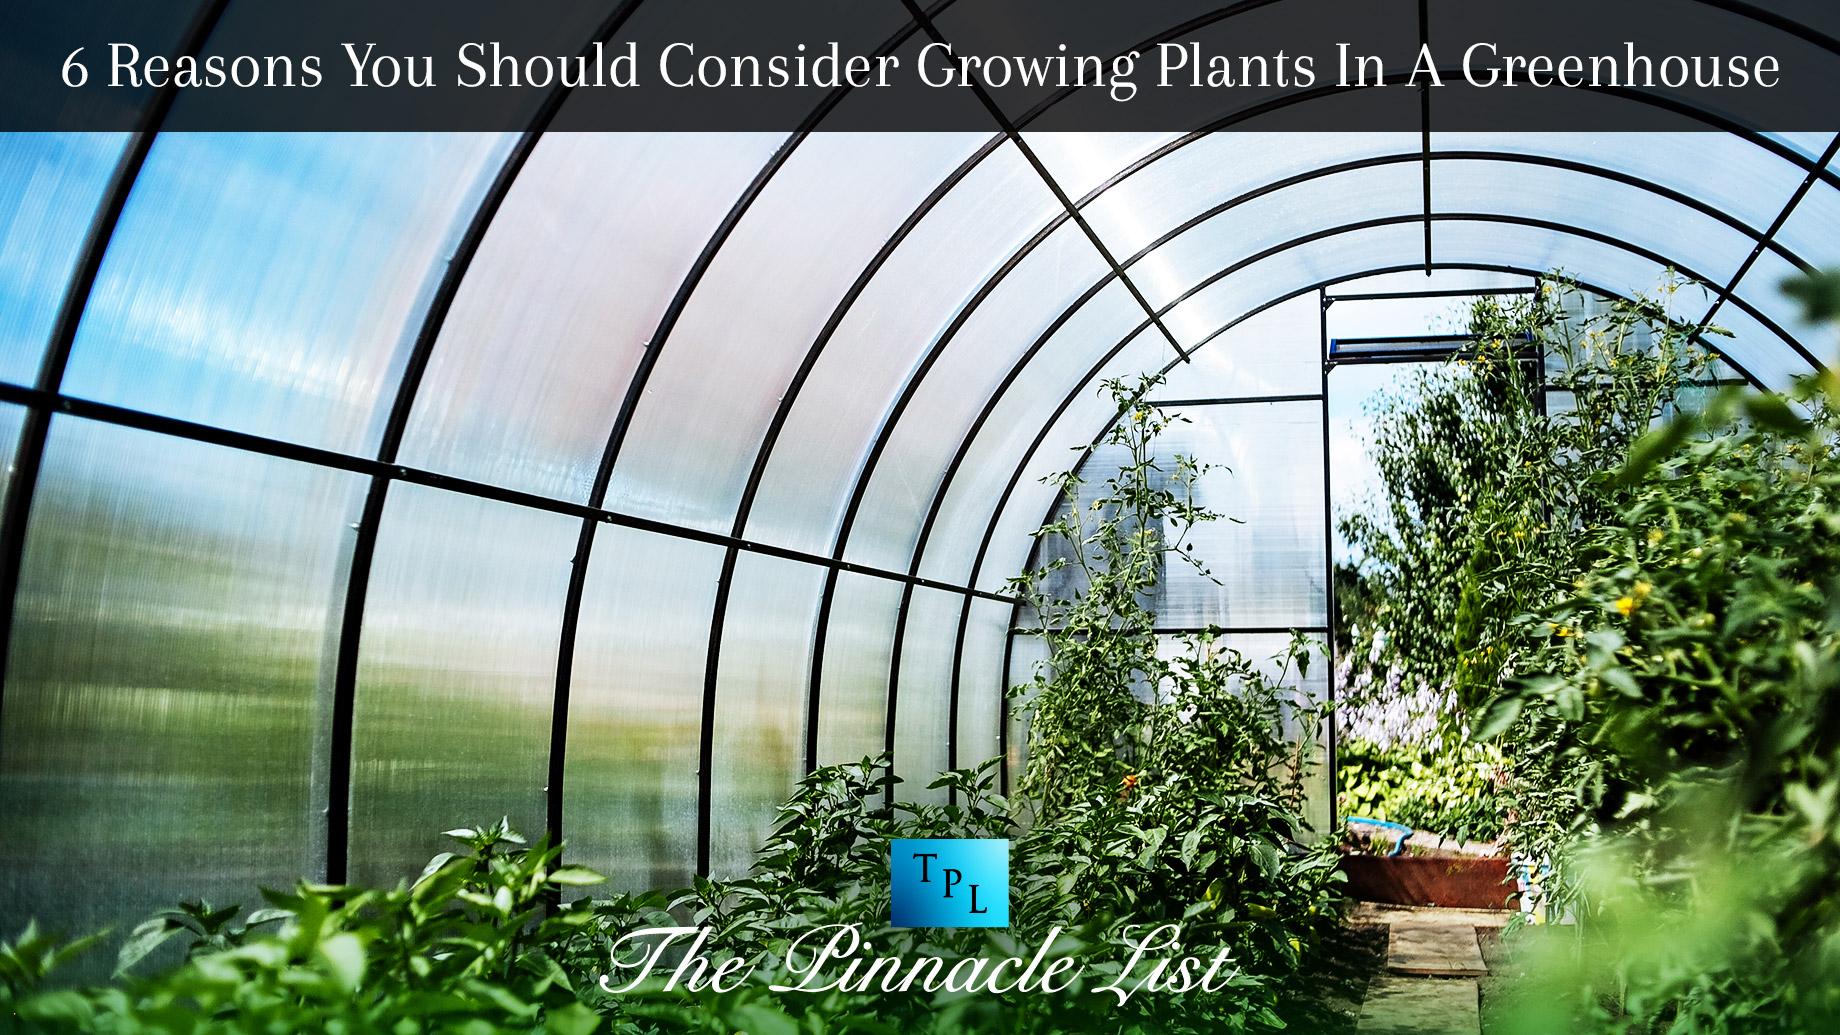 6 Reasons You Should Consider Growing Plants In A Greenhouse